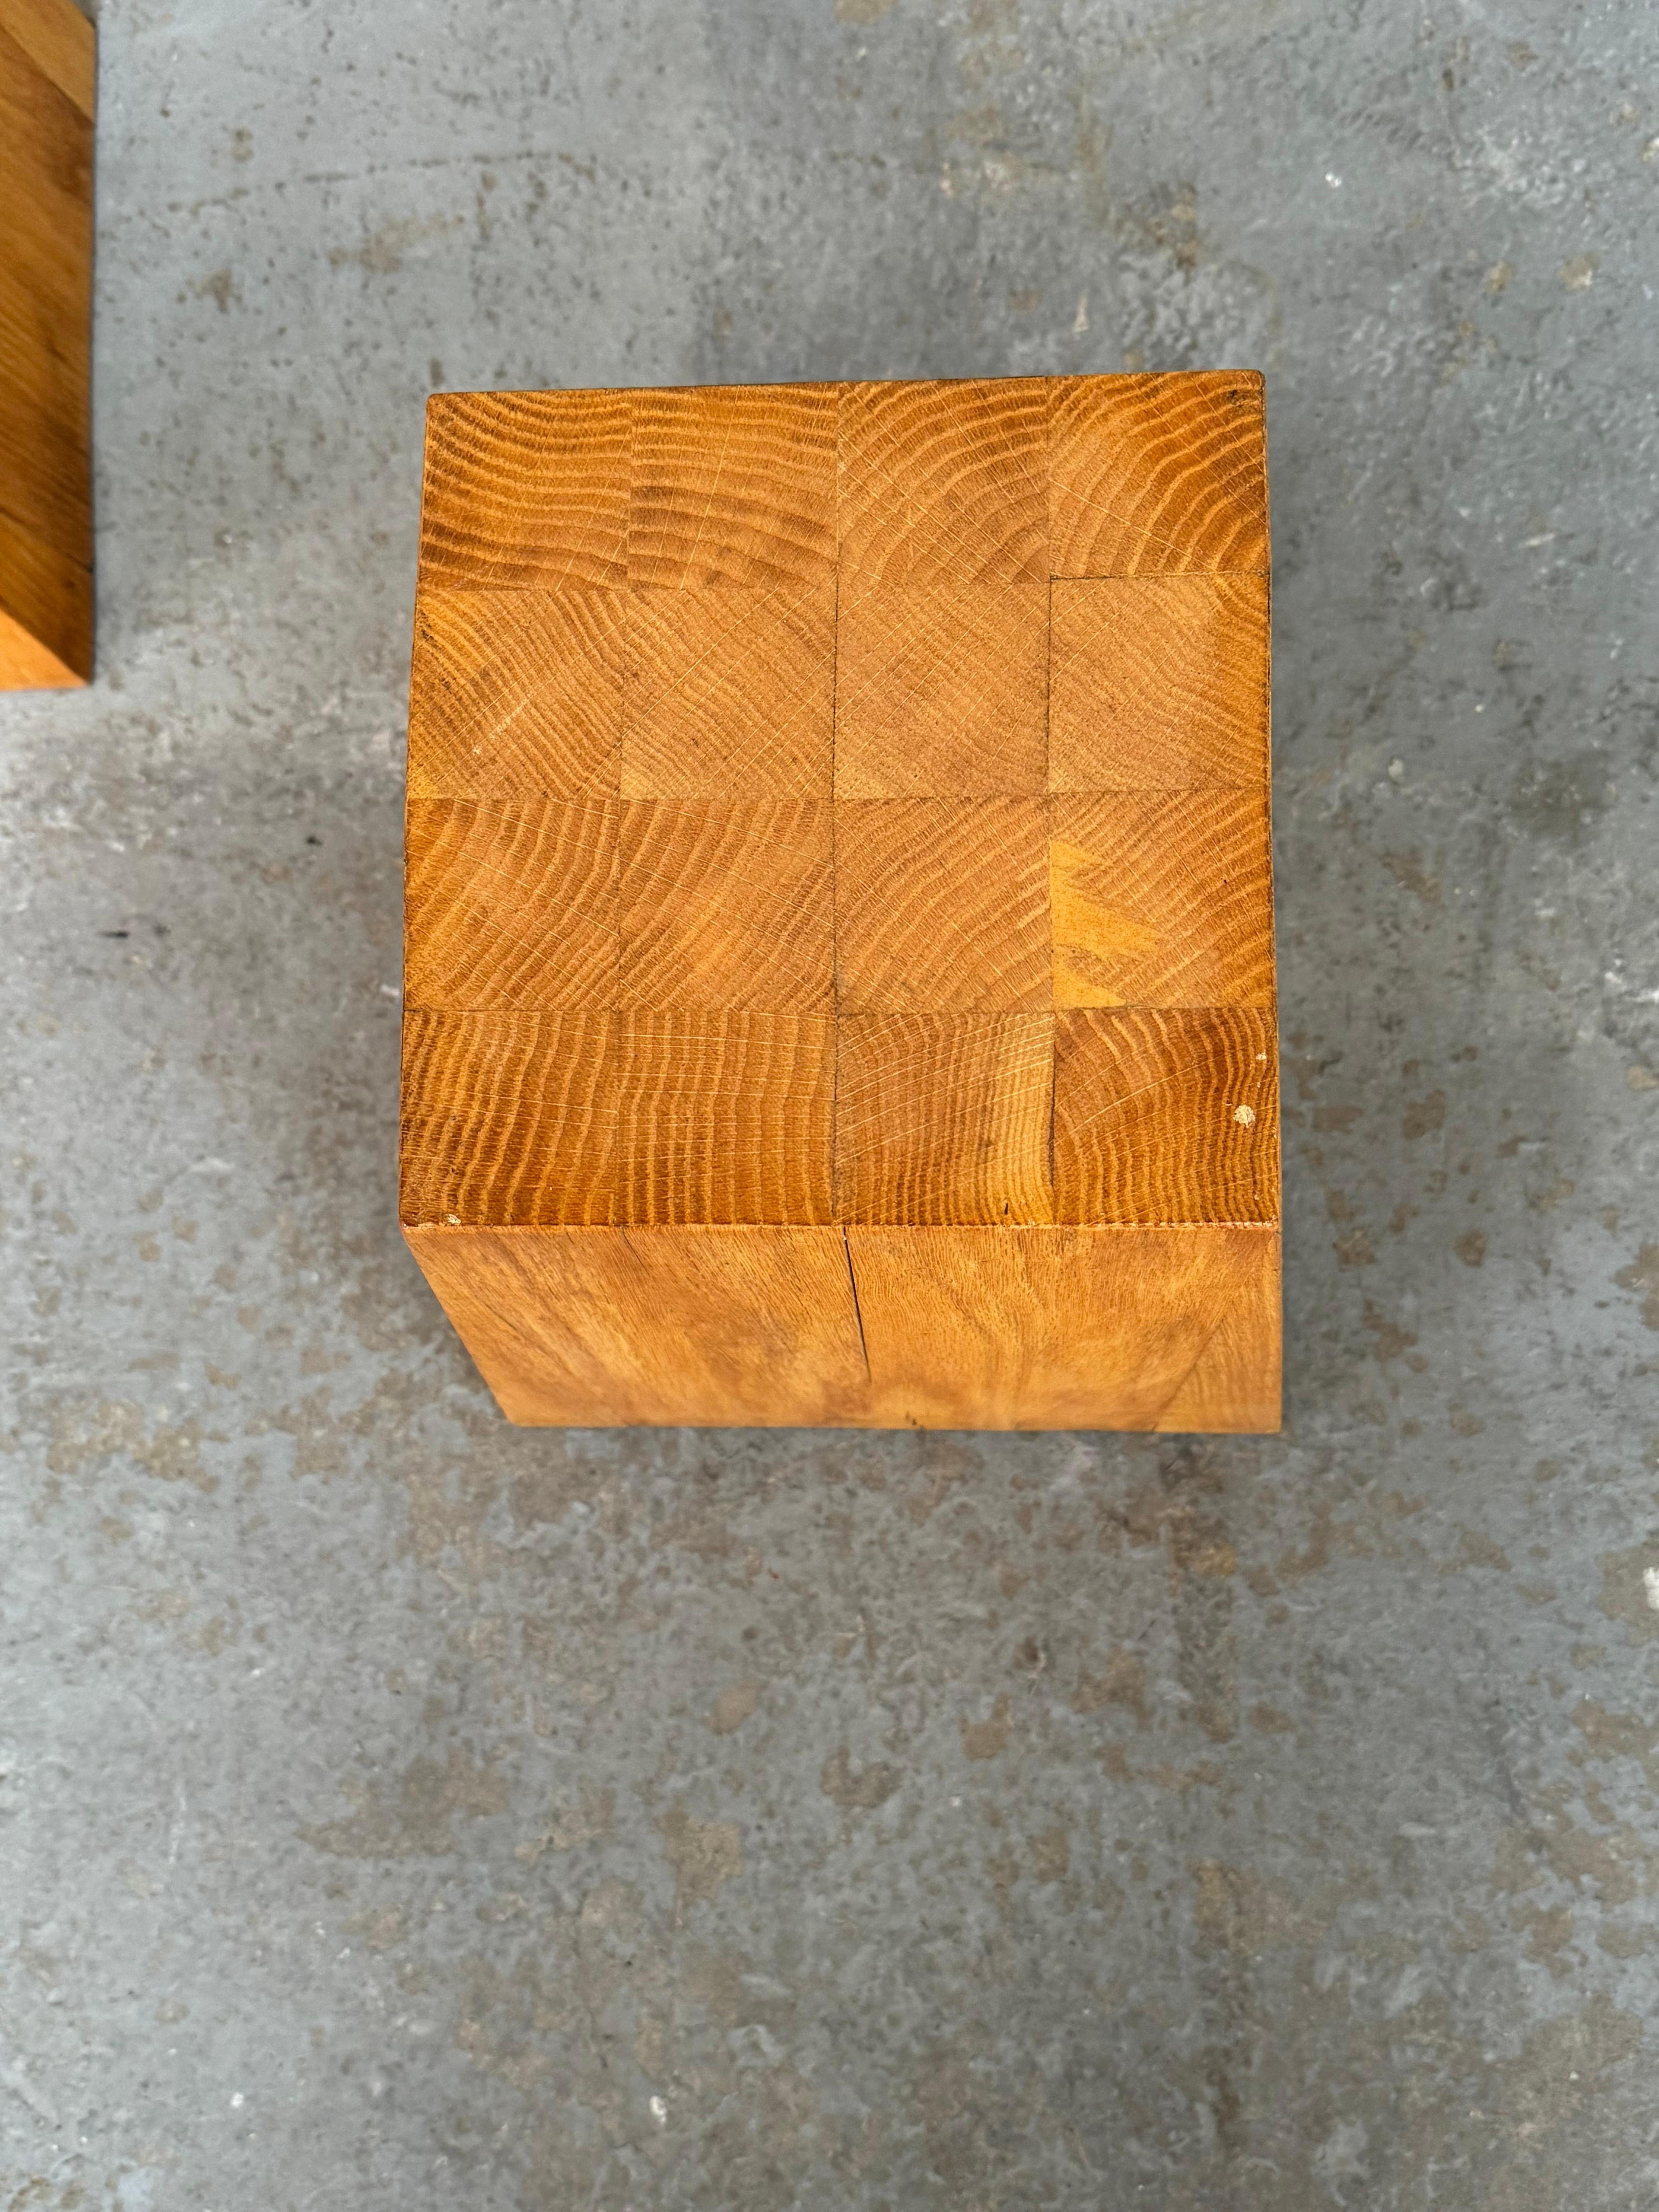 Solid Elm Side Tables / Pedestals from Denmark In Good Condition For Sale In Oakland, CA